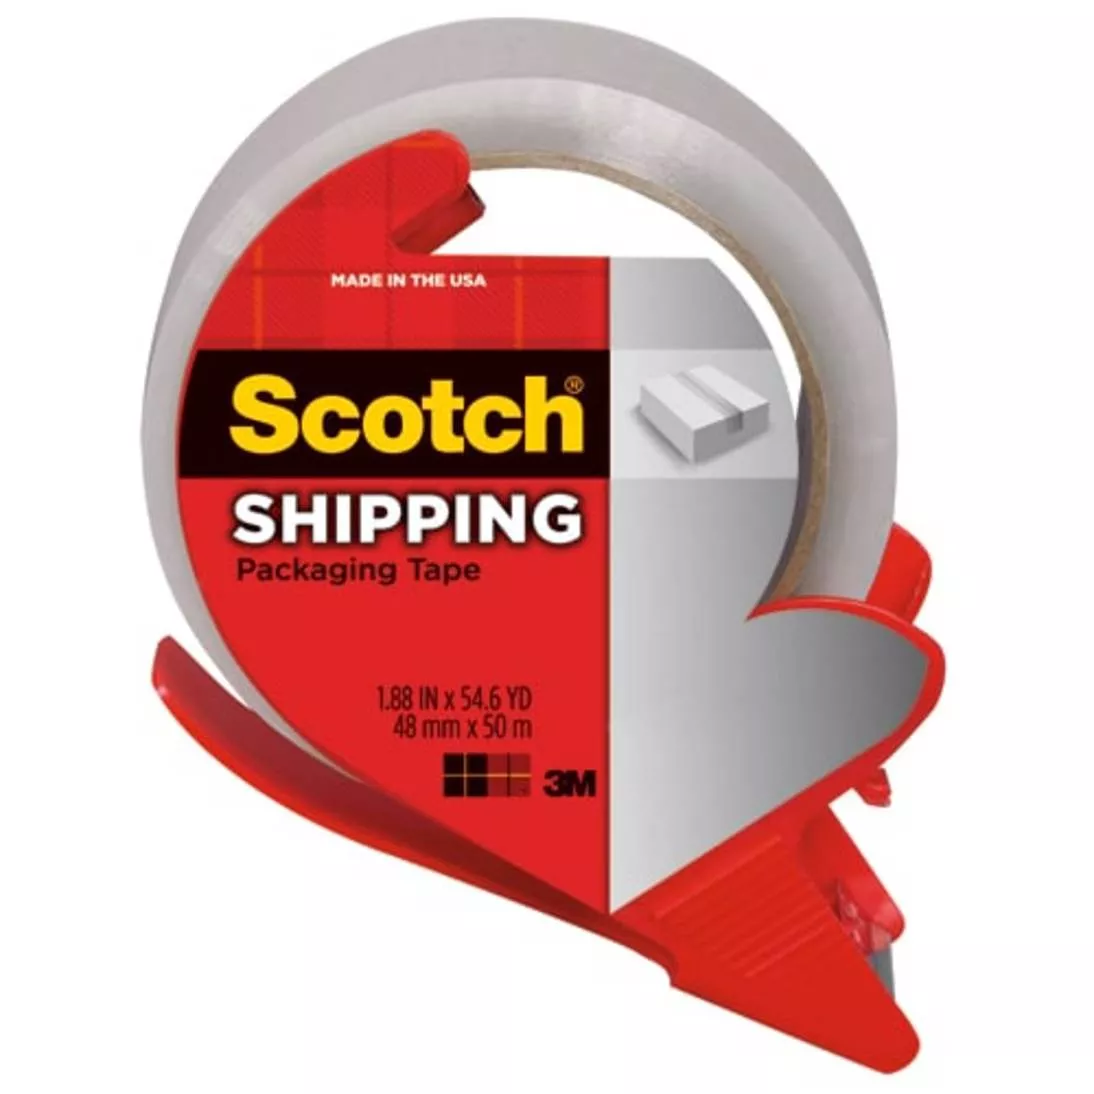 Scotch® Shipping Packaging Tape 3350-RD-36GC, 1.88 in x 54.6 yd (48 mm x 50 m)